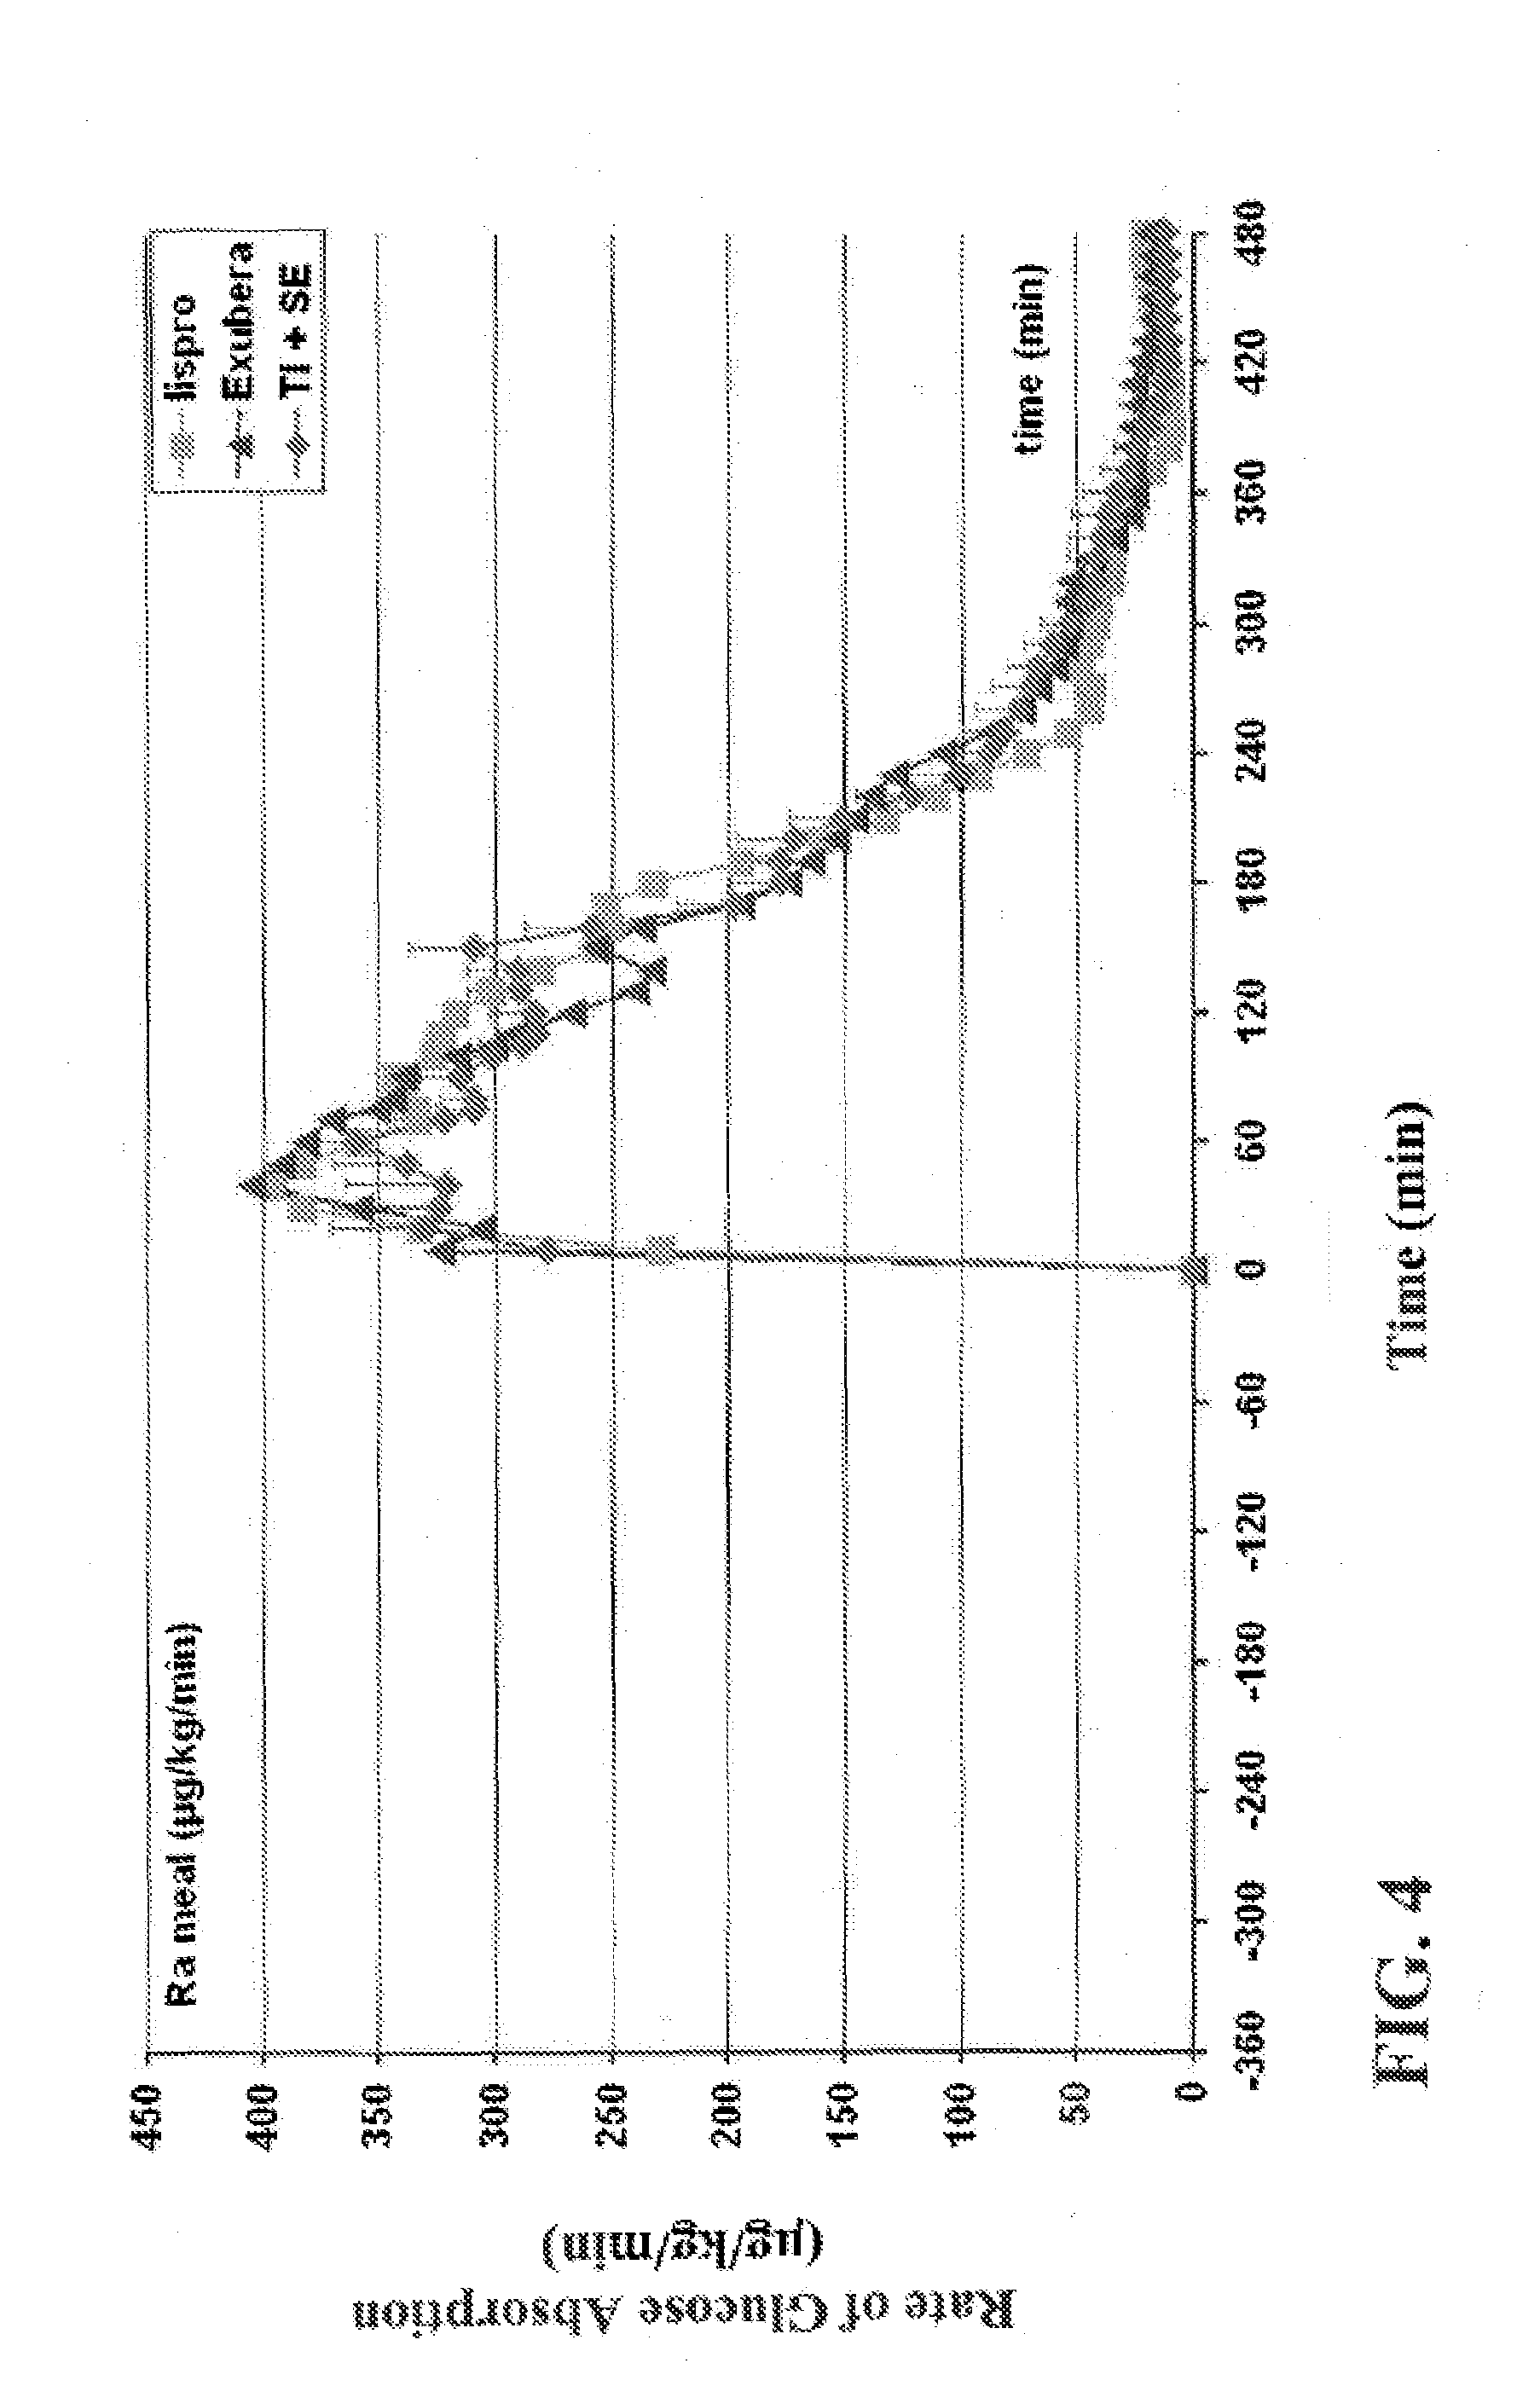 Use of ultrarapid acting insulin